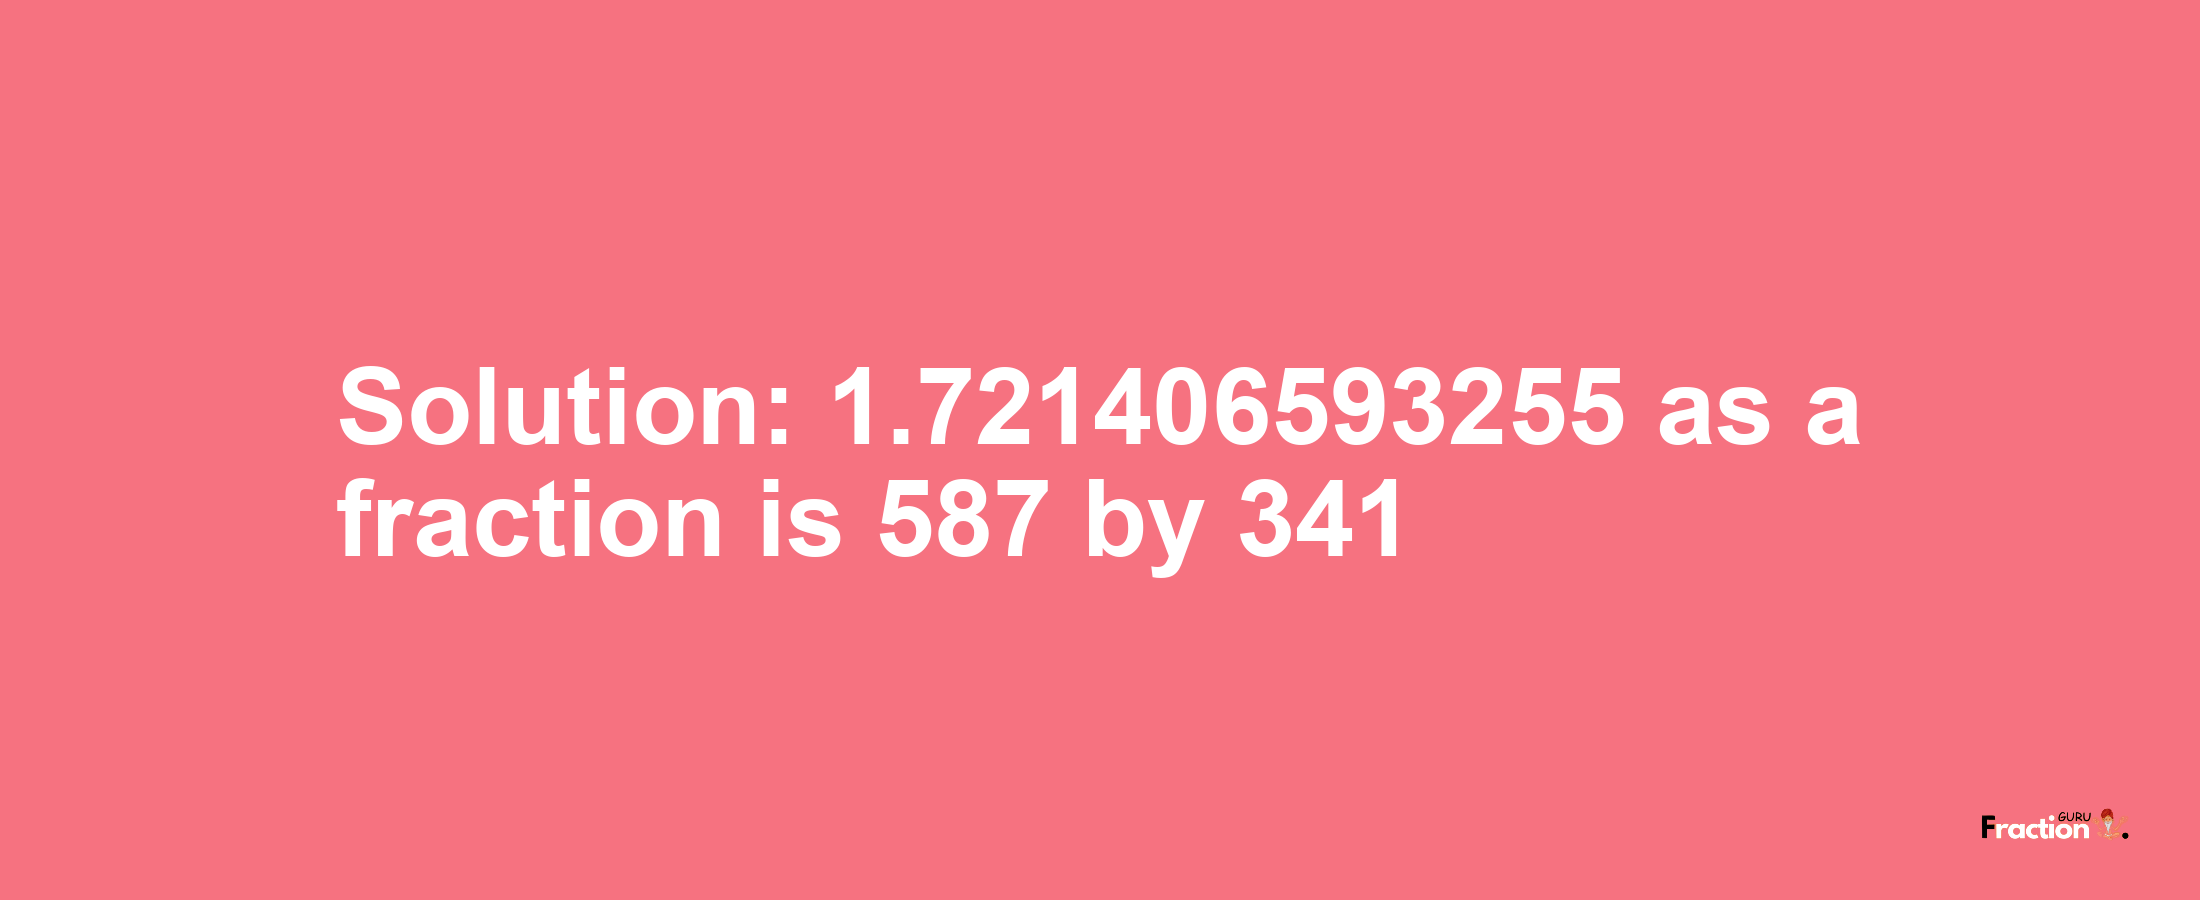 Solution:1.721406593255 as a fraction is 587/341